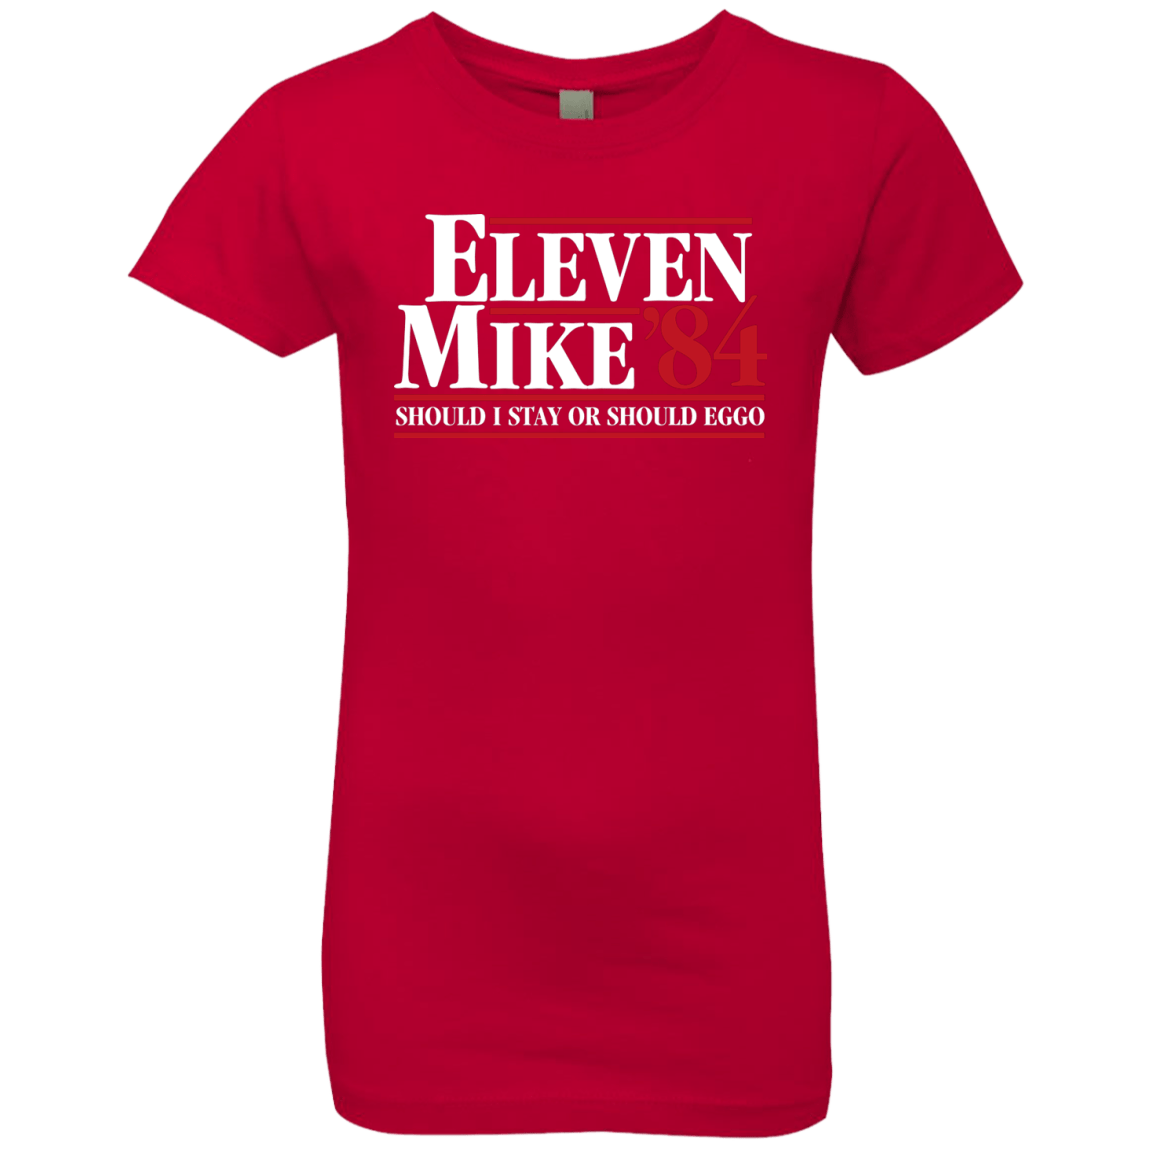 T-Shirts Red / YXS Eleven Mike 84 - Should I Stay or Should Eggo Girls Premium T-Shirt